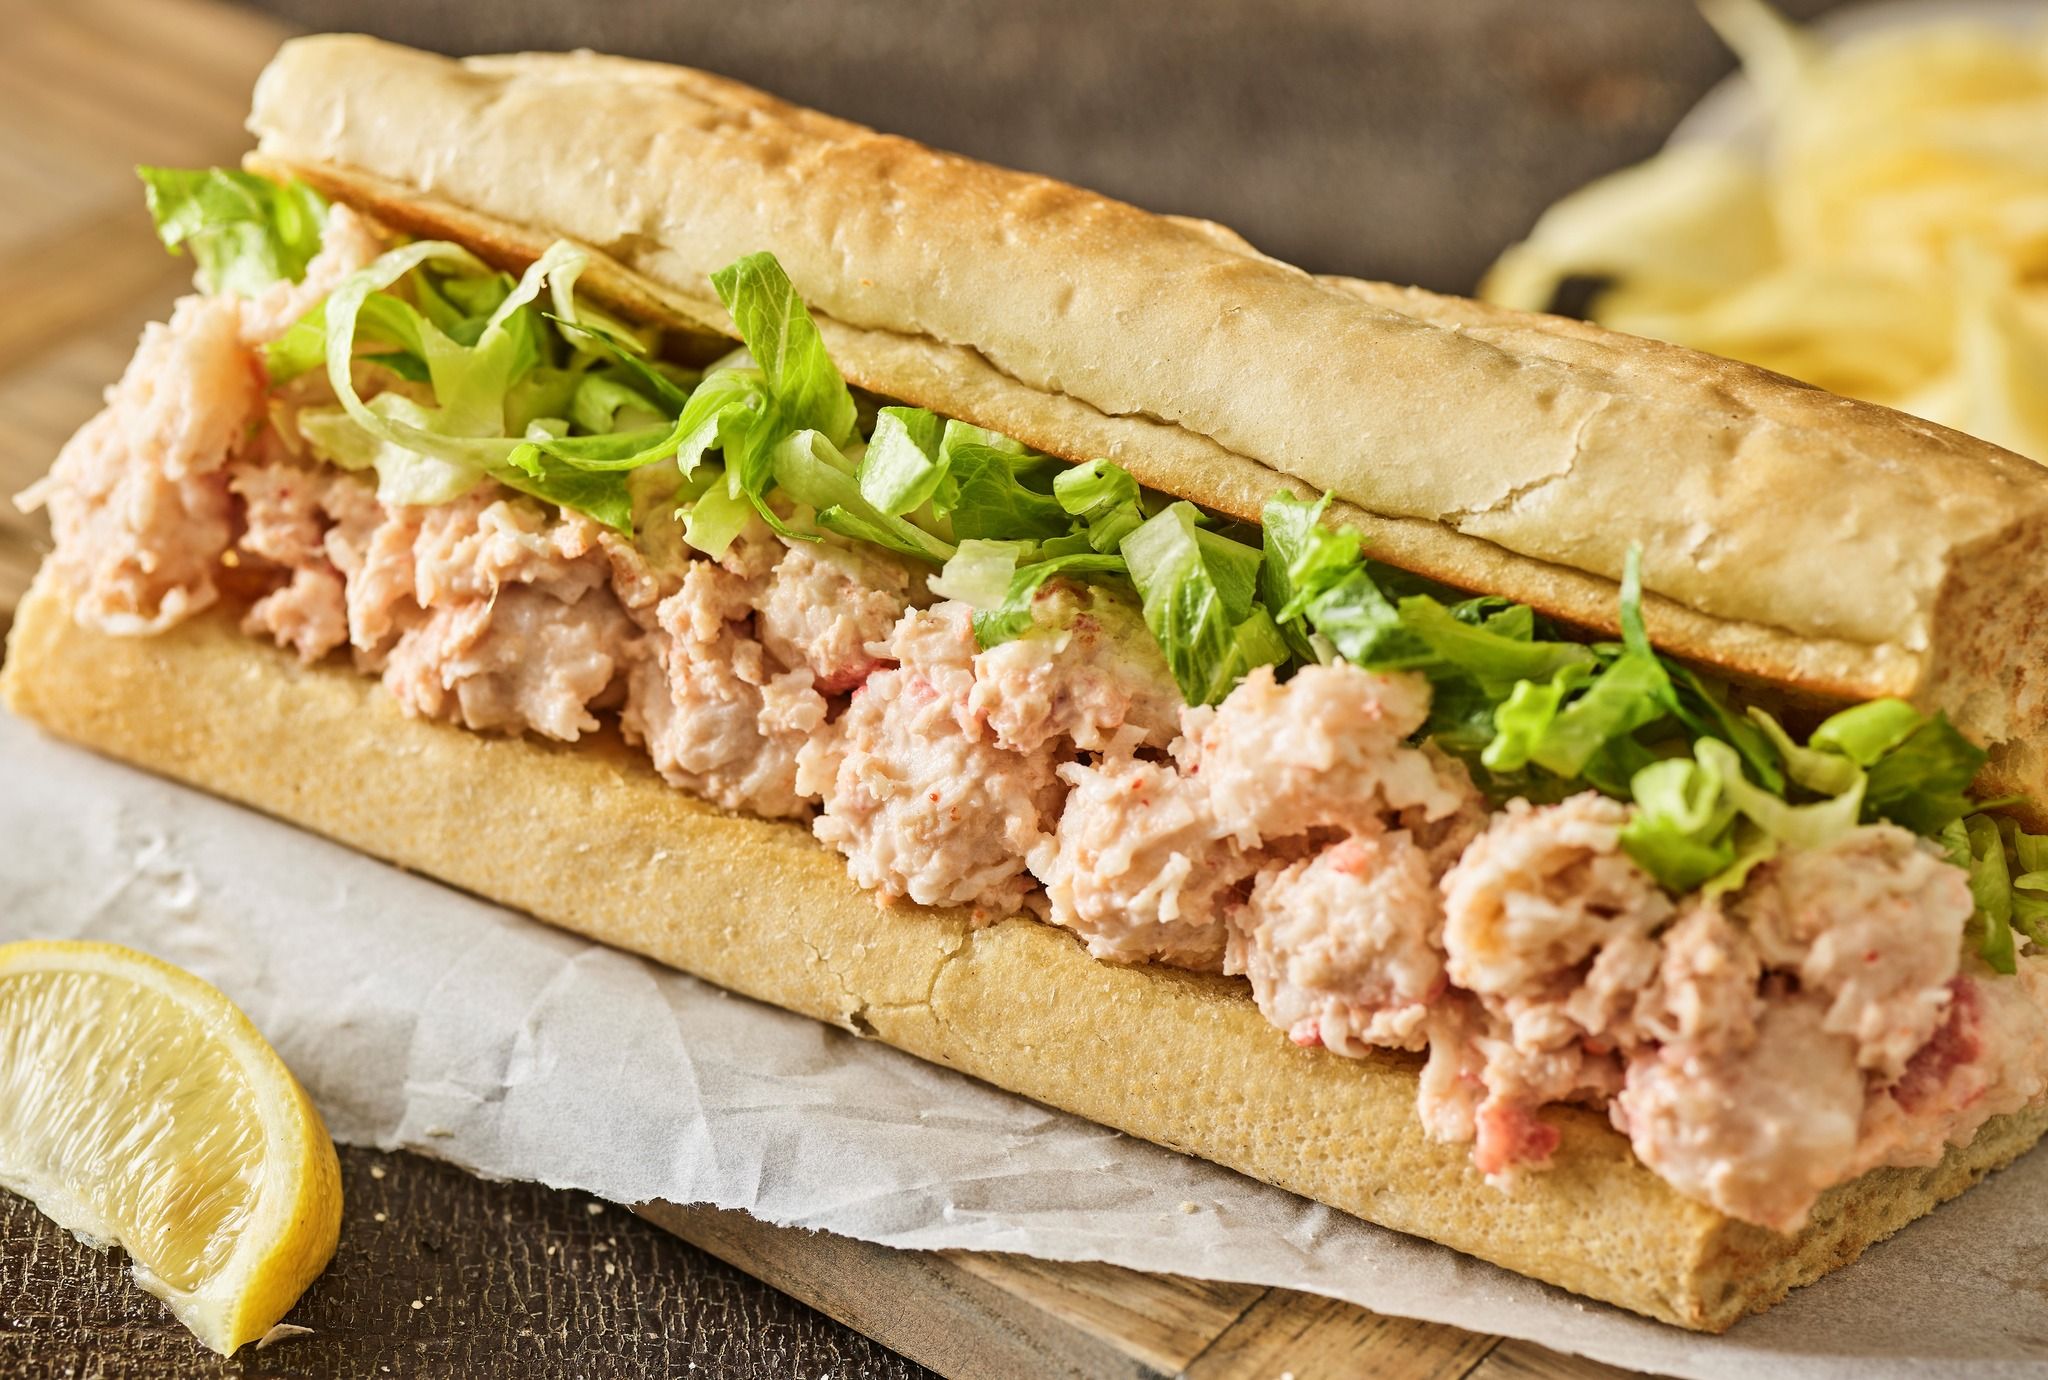 Quiznos’ Lemon Herb Lobster and Lobster Classic Sub Arrive for a Limited Time